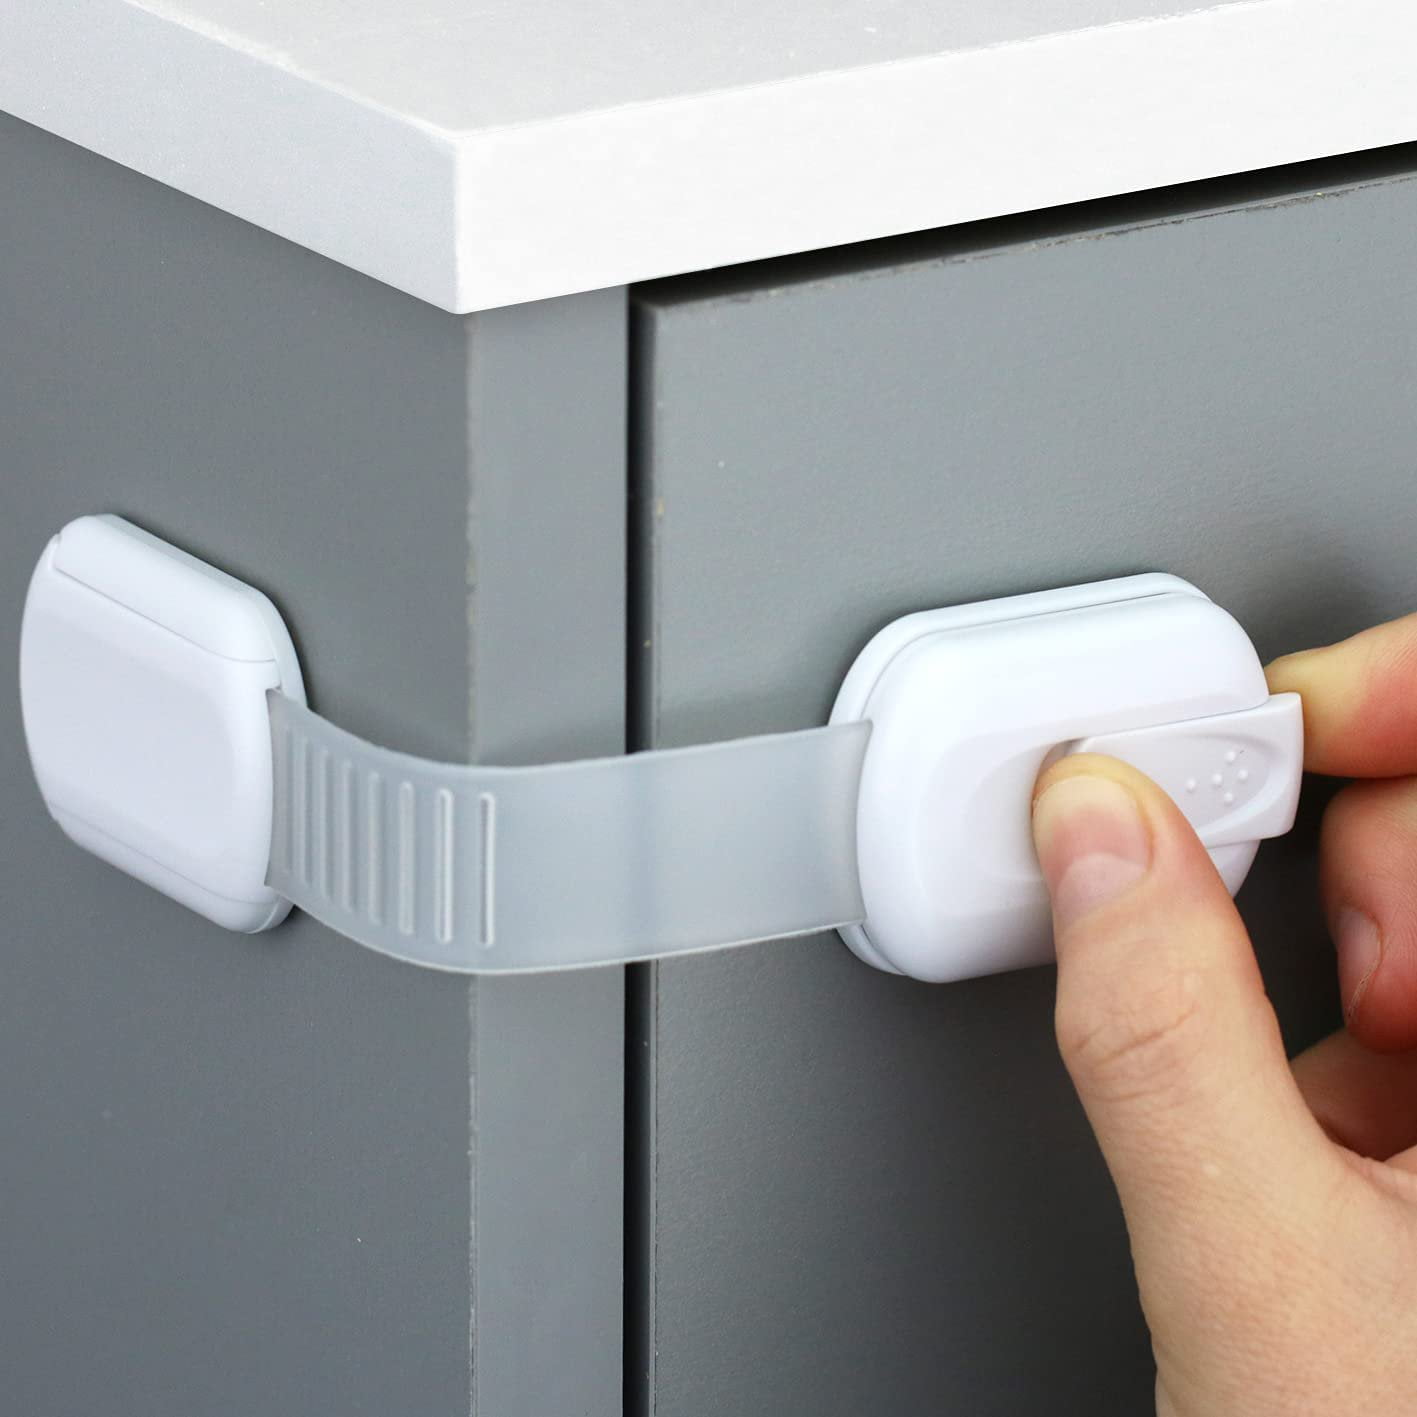 BossBaby Child Safety Cabinet Locks | Baby Proof Drawers, Cupboards, Toilet Seat, Fridge, Oven | No Drill, No Screw | Super Strong 3M Adhesive Adjustable Strap